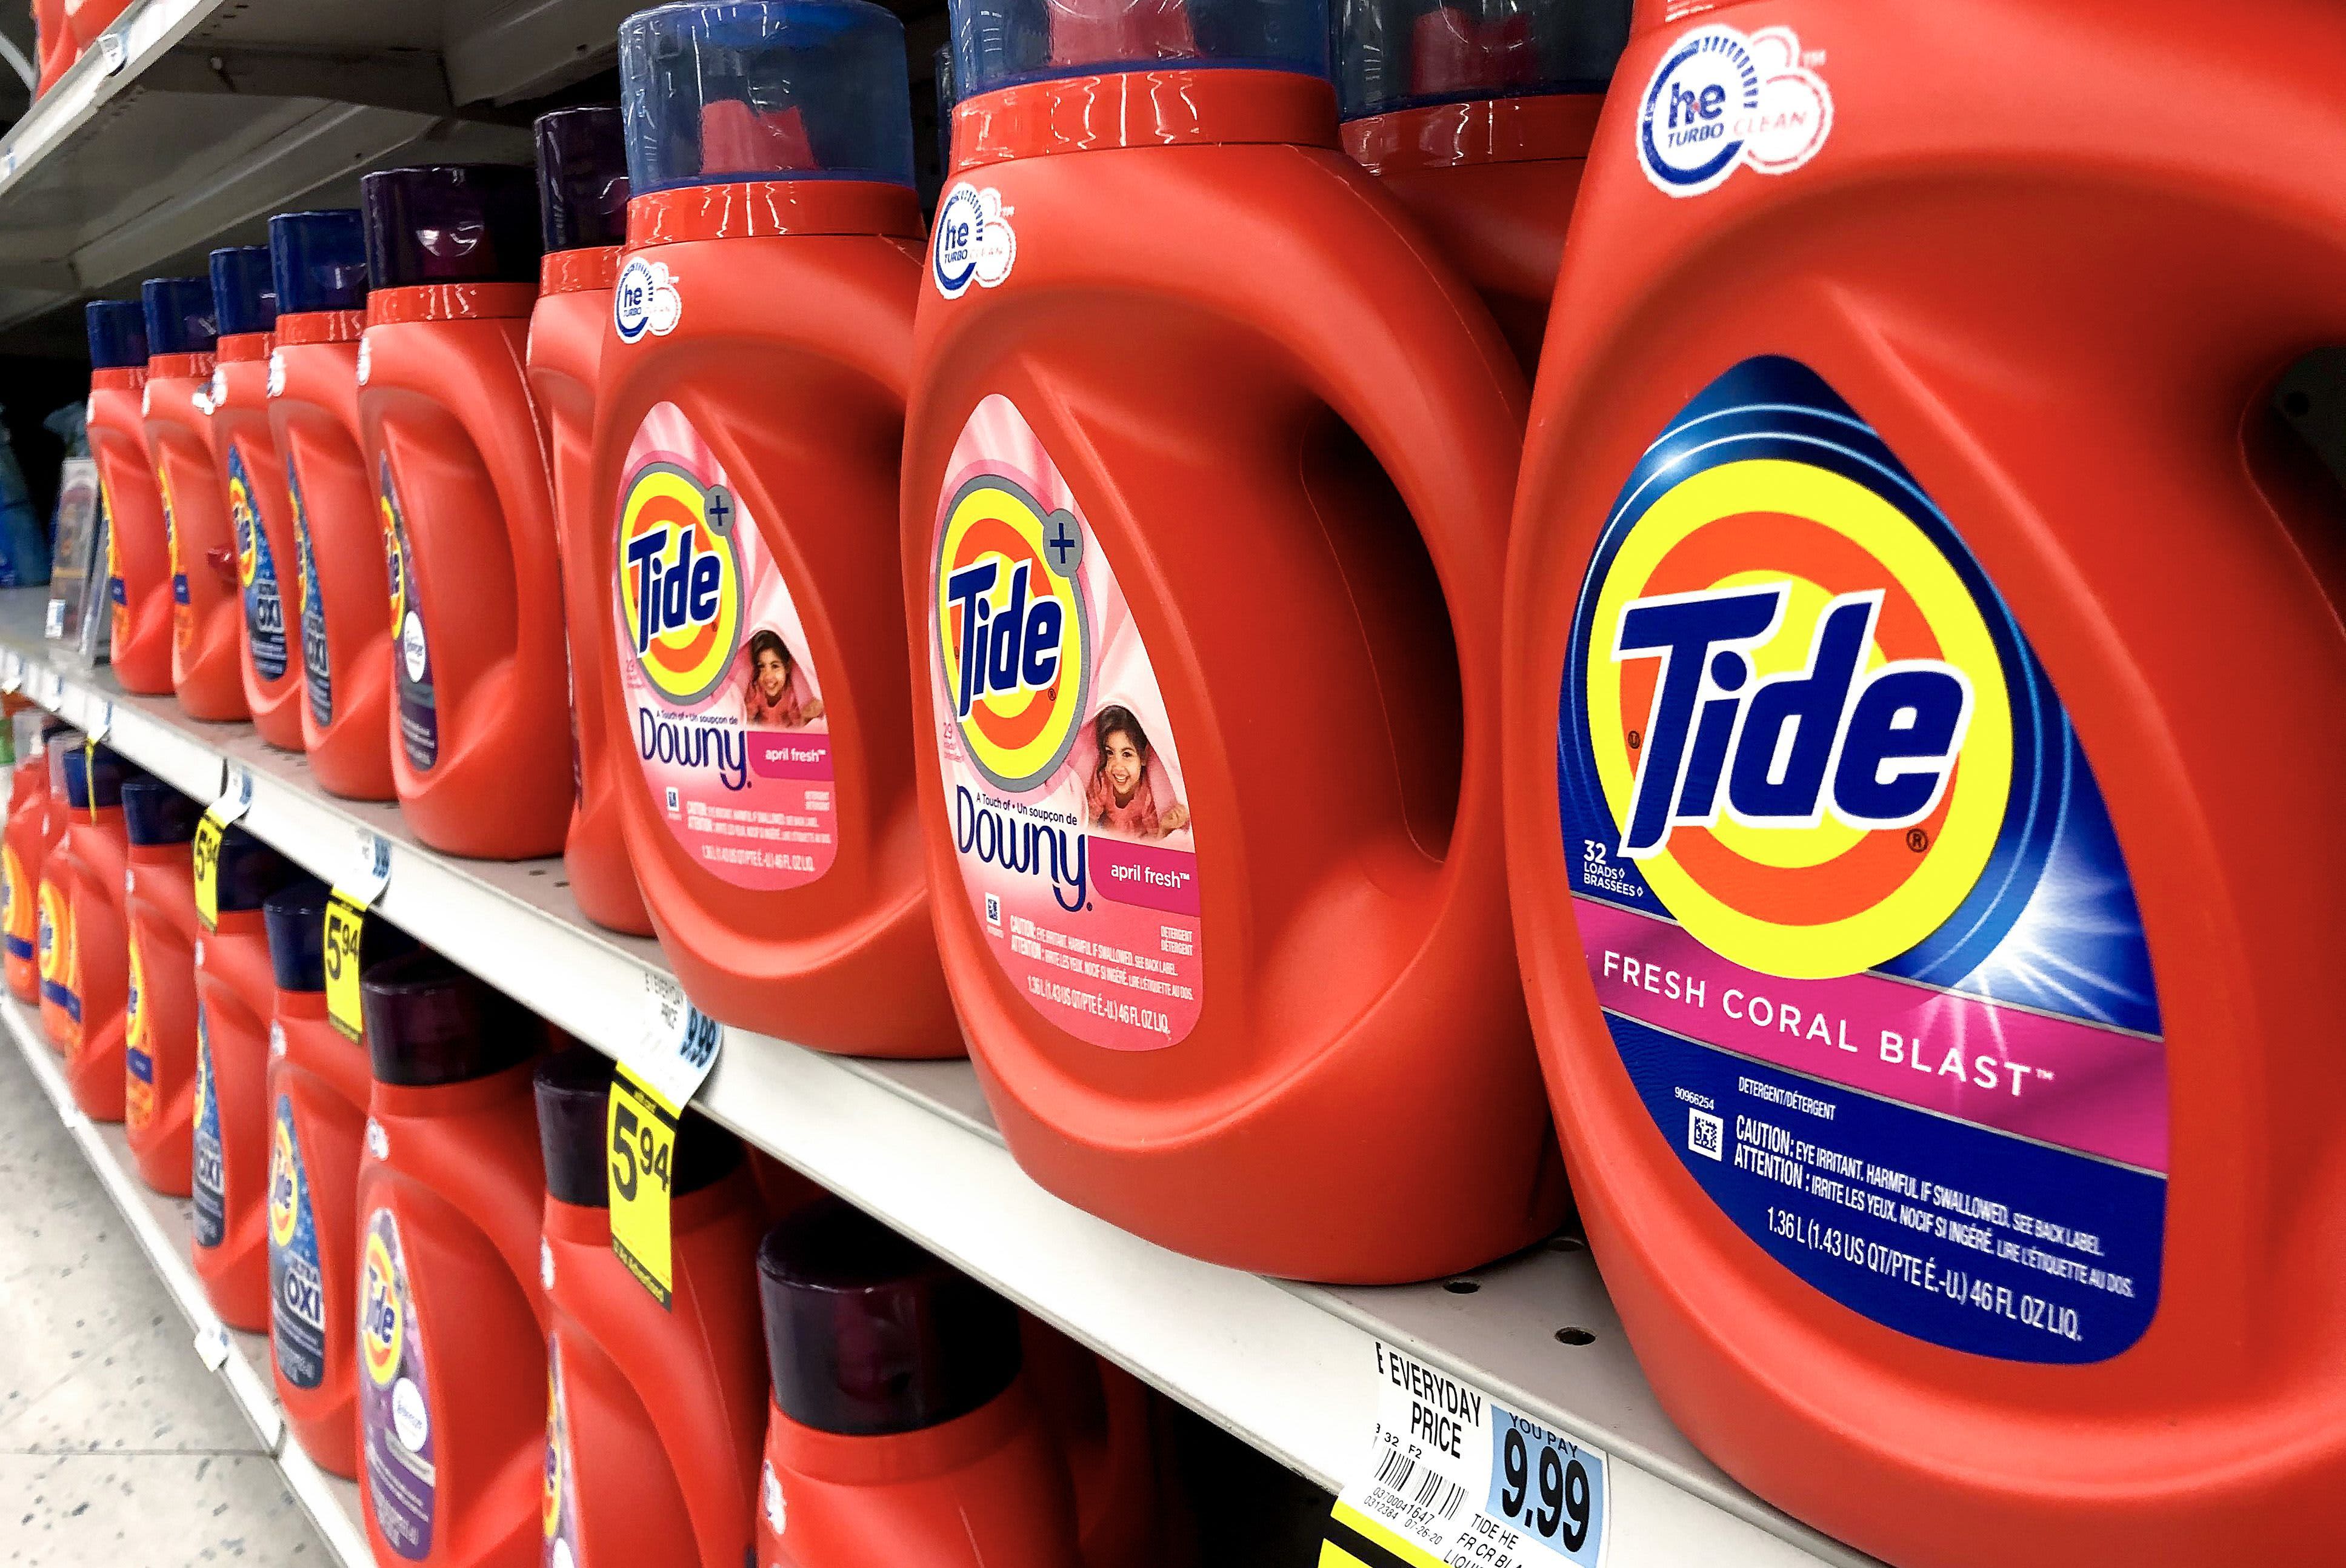 Procter & Gamble (PG) Q2 2021 gains the highest expectations